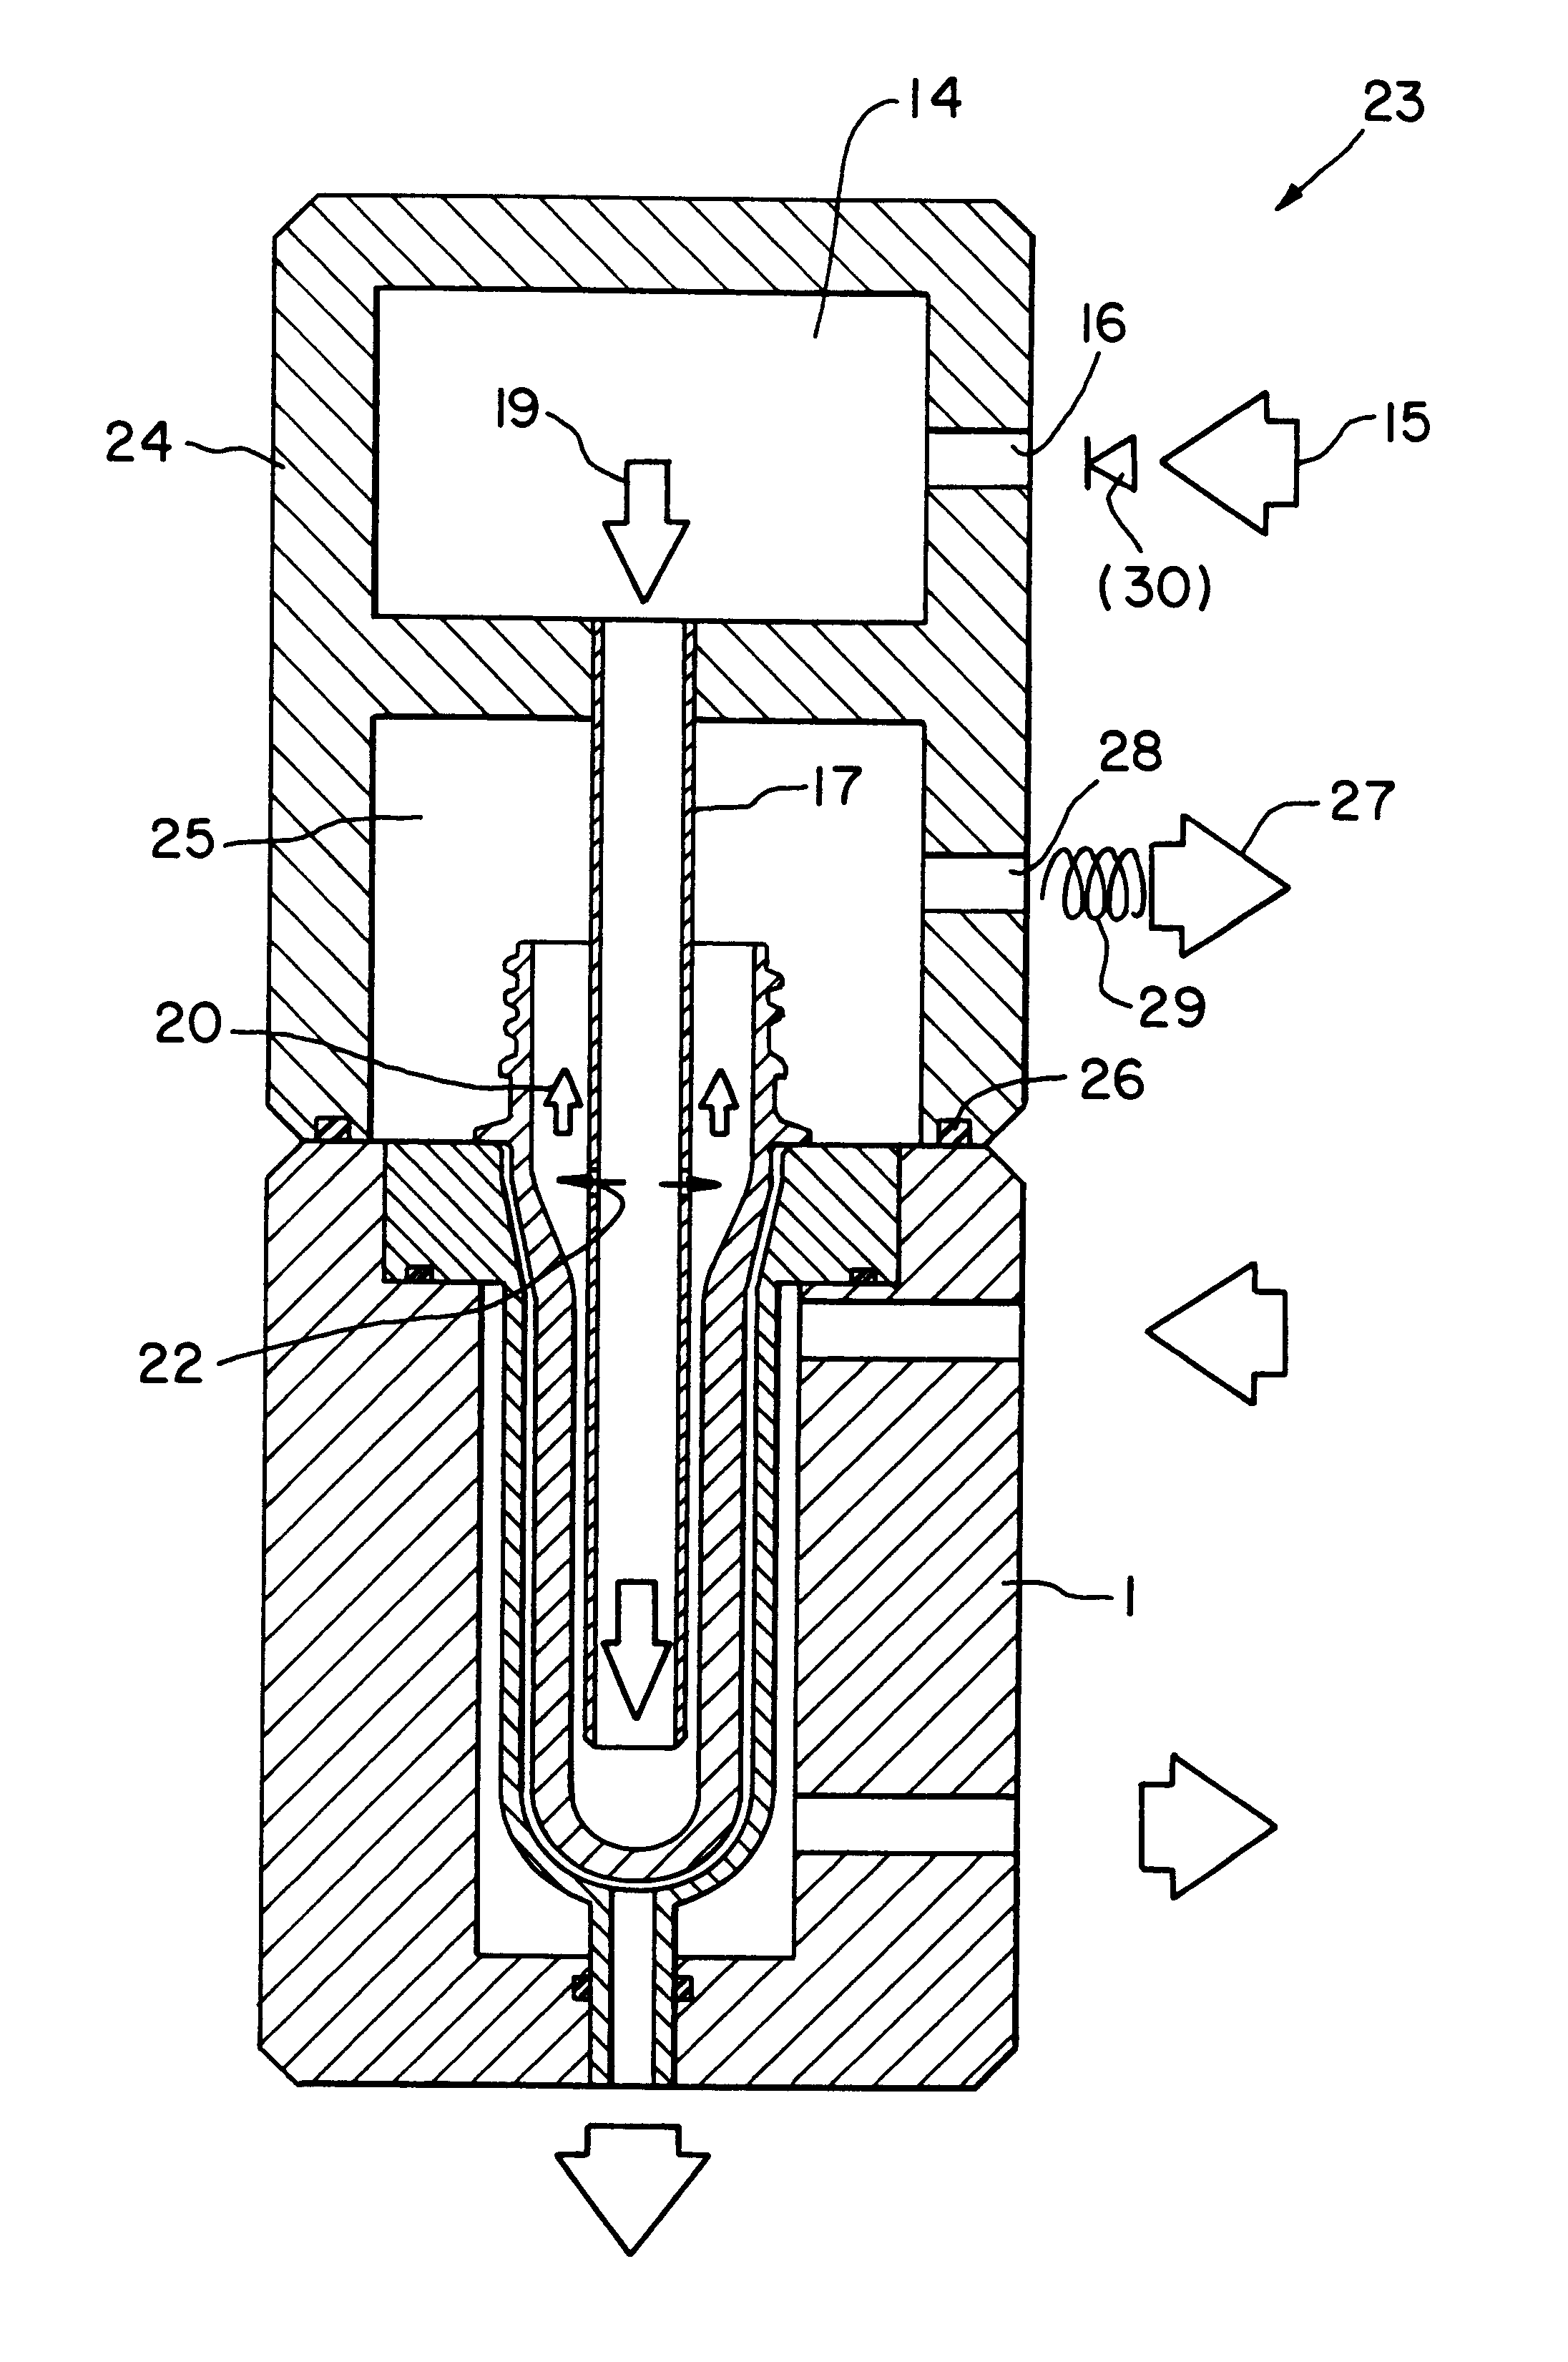 Method and device for the after-cooling of a preform in the injection molding process